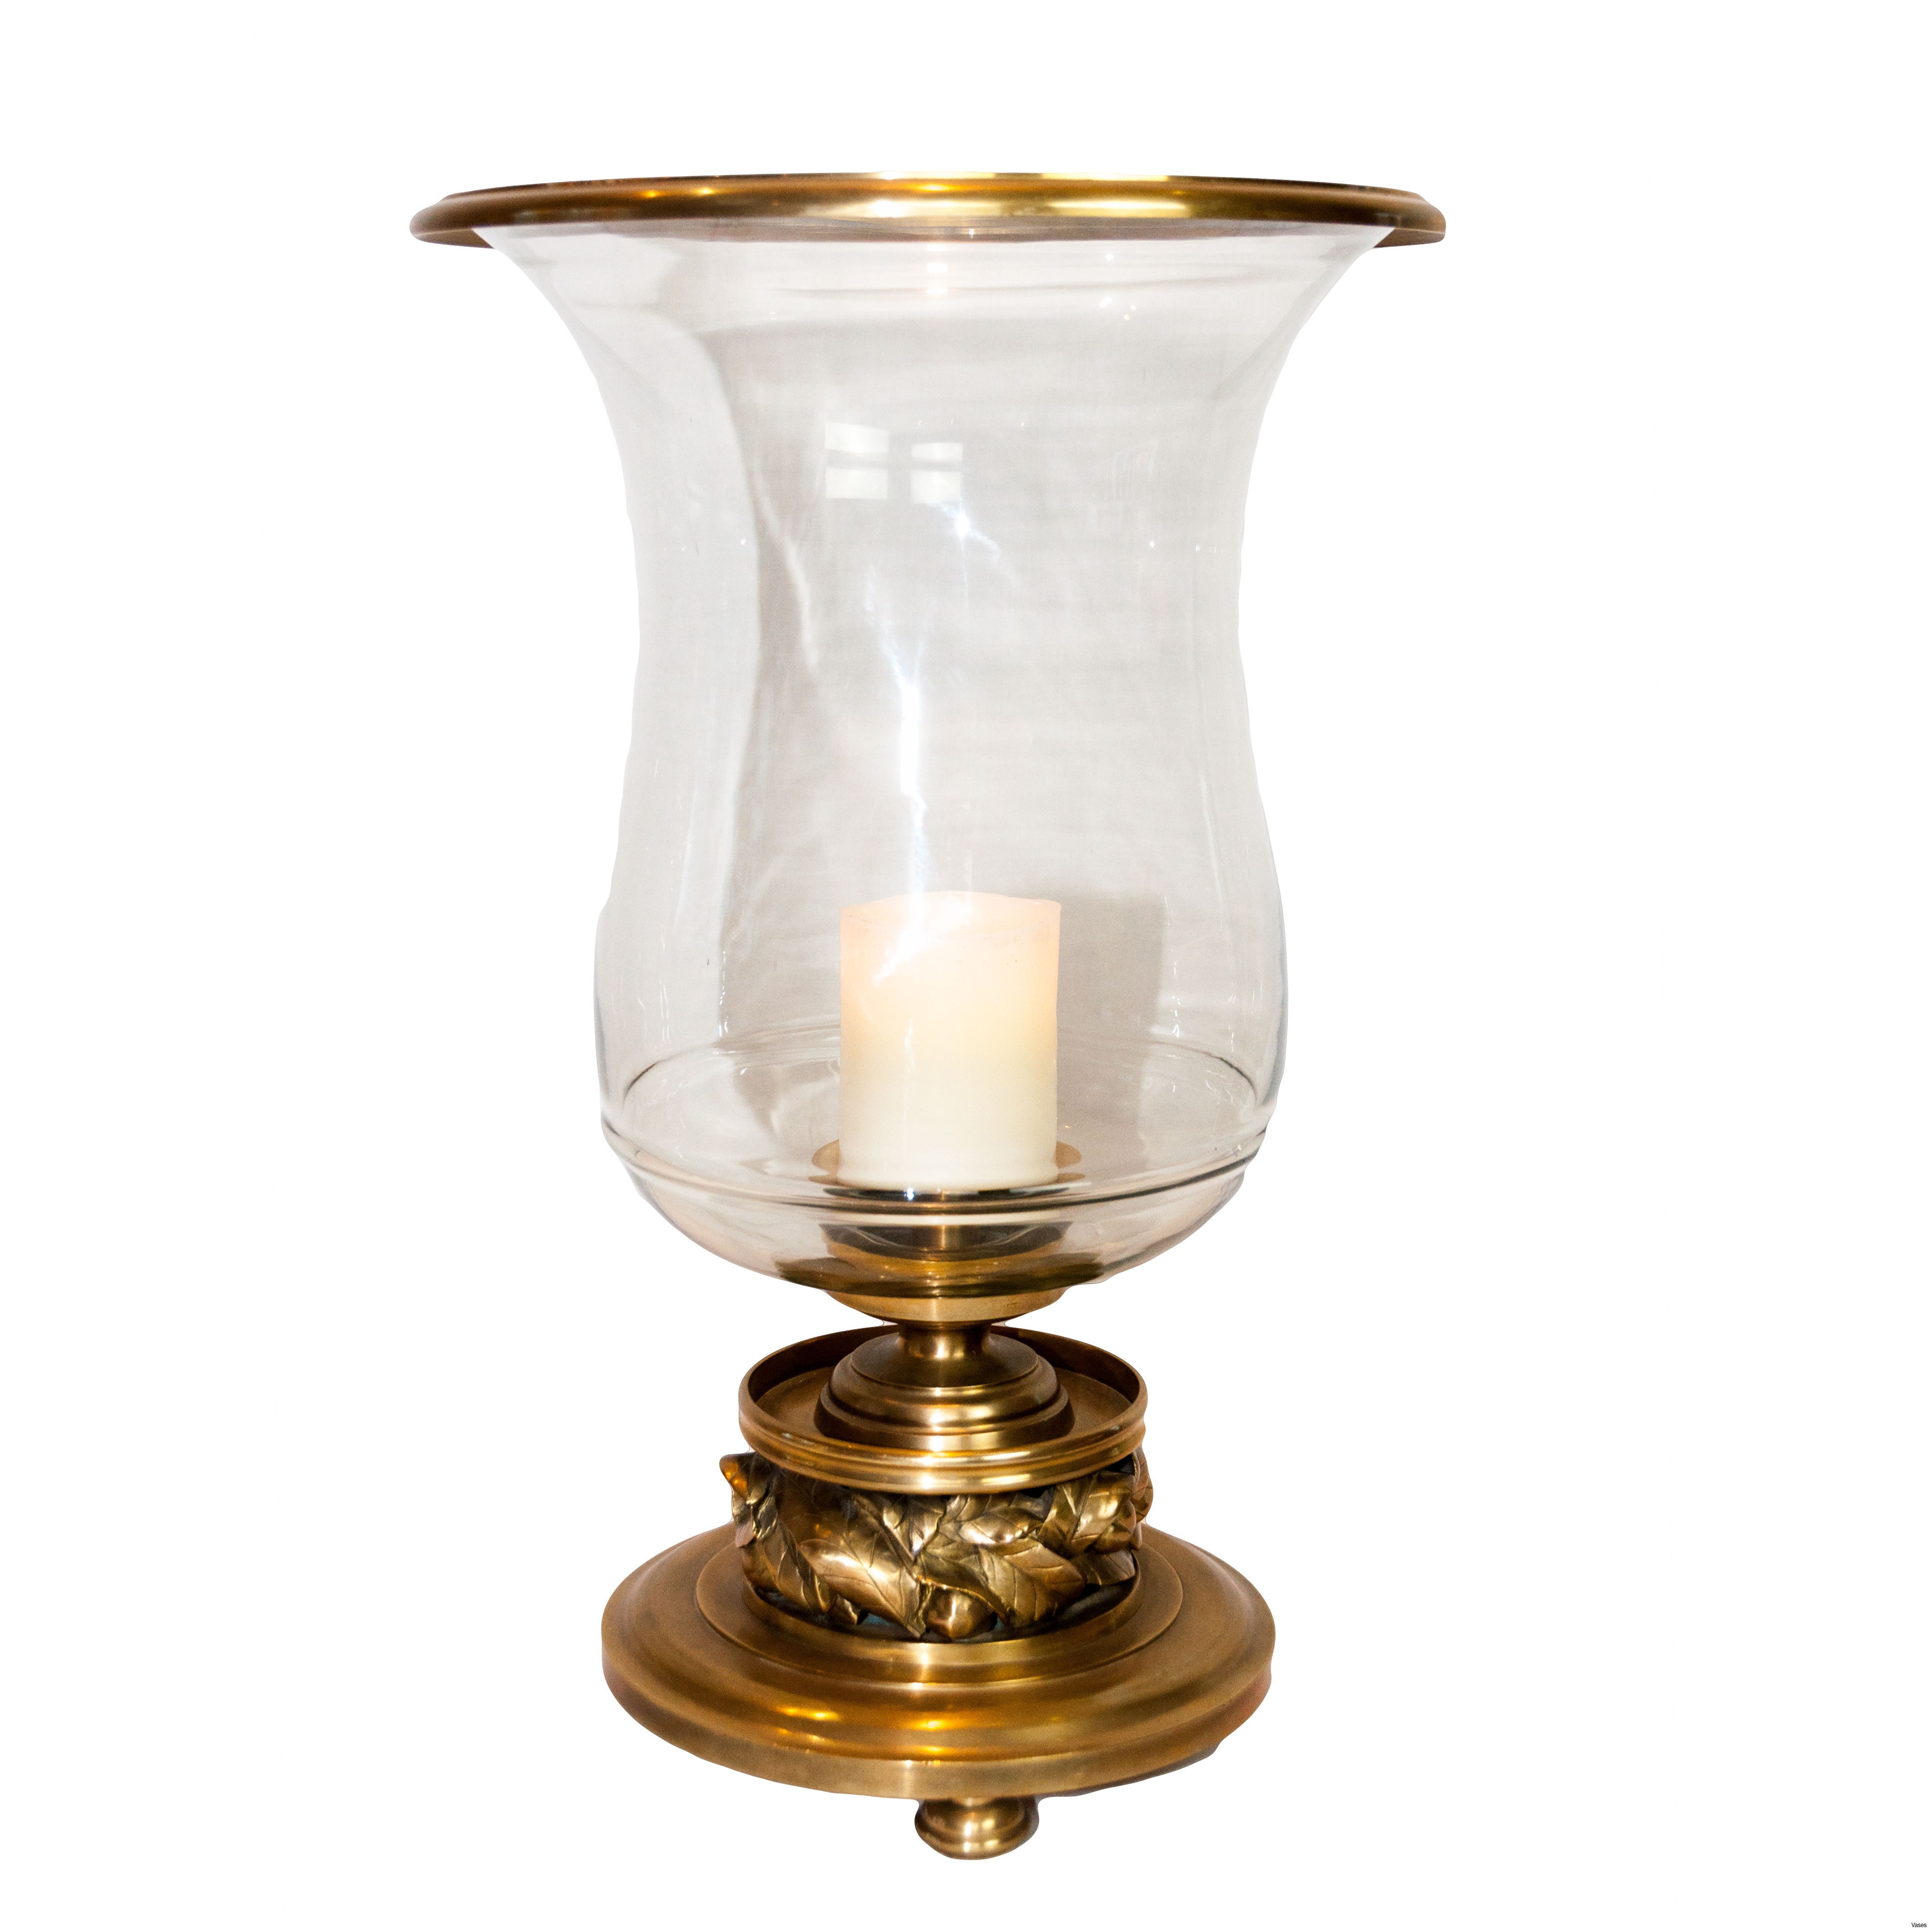 12 Awesome Cheap 10 Inch Cylinder Vases 2024 free download cheap 10 inch cylinder vases of glass cylinder hurricane images antique brass floor lamp beautiful with glass cylinder hurricane images antique brass floor lamp beautiful ao3 210h vases hurr